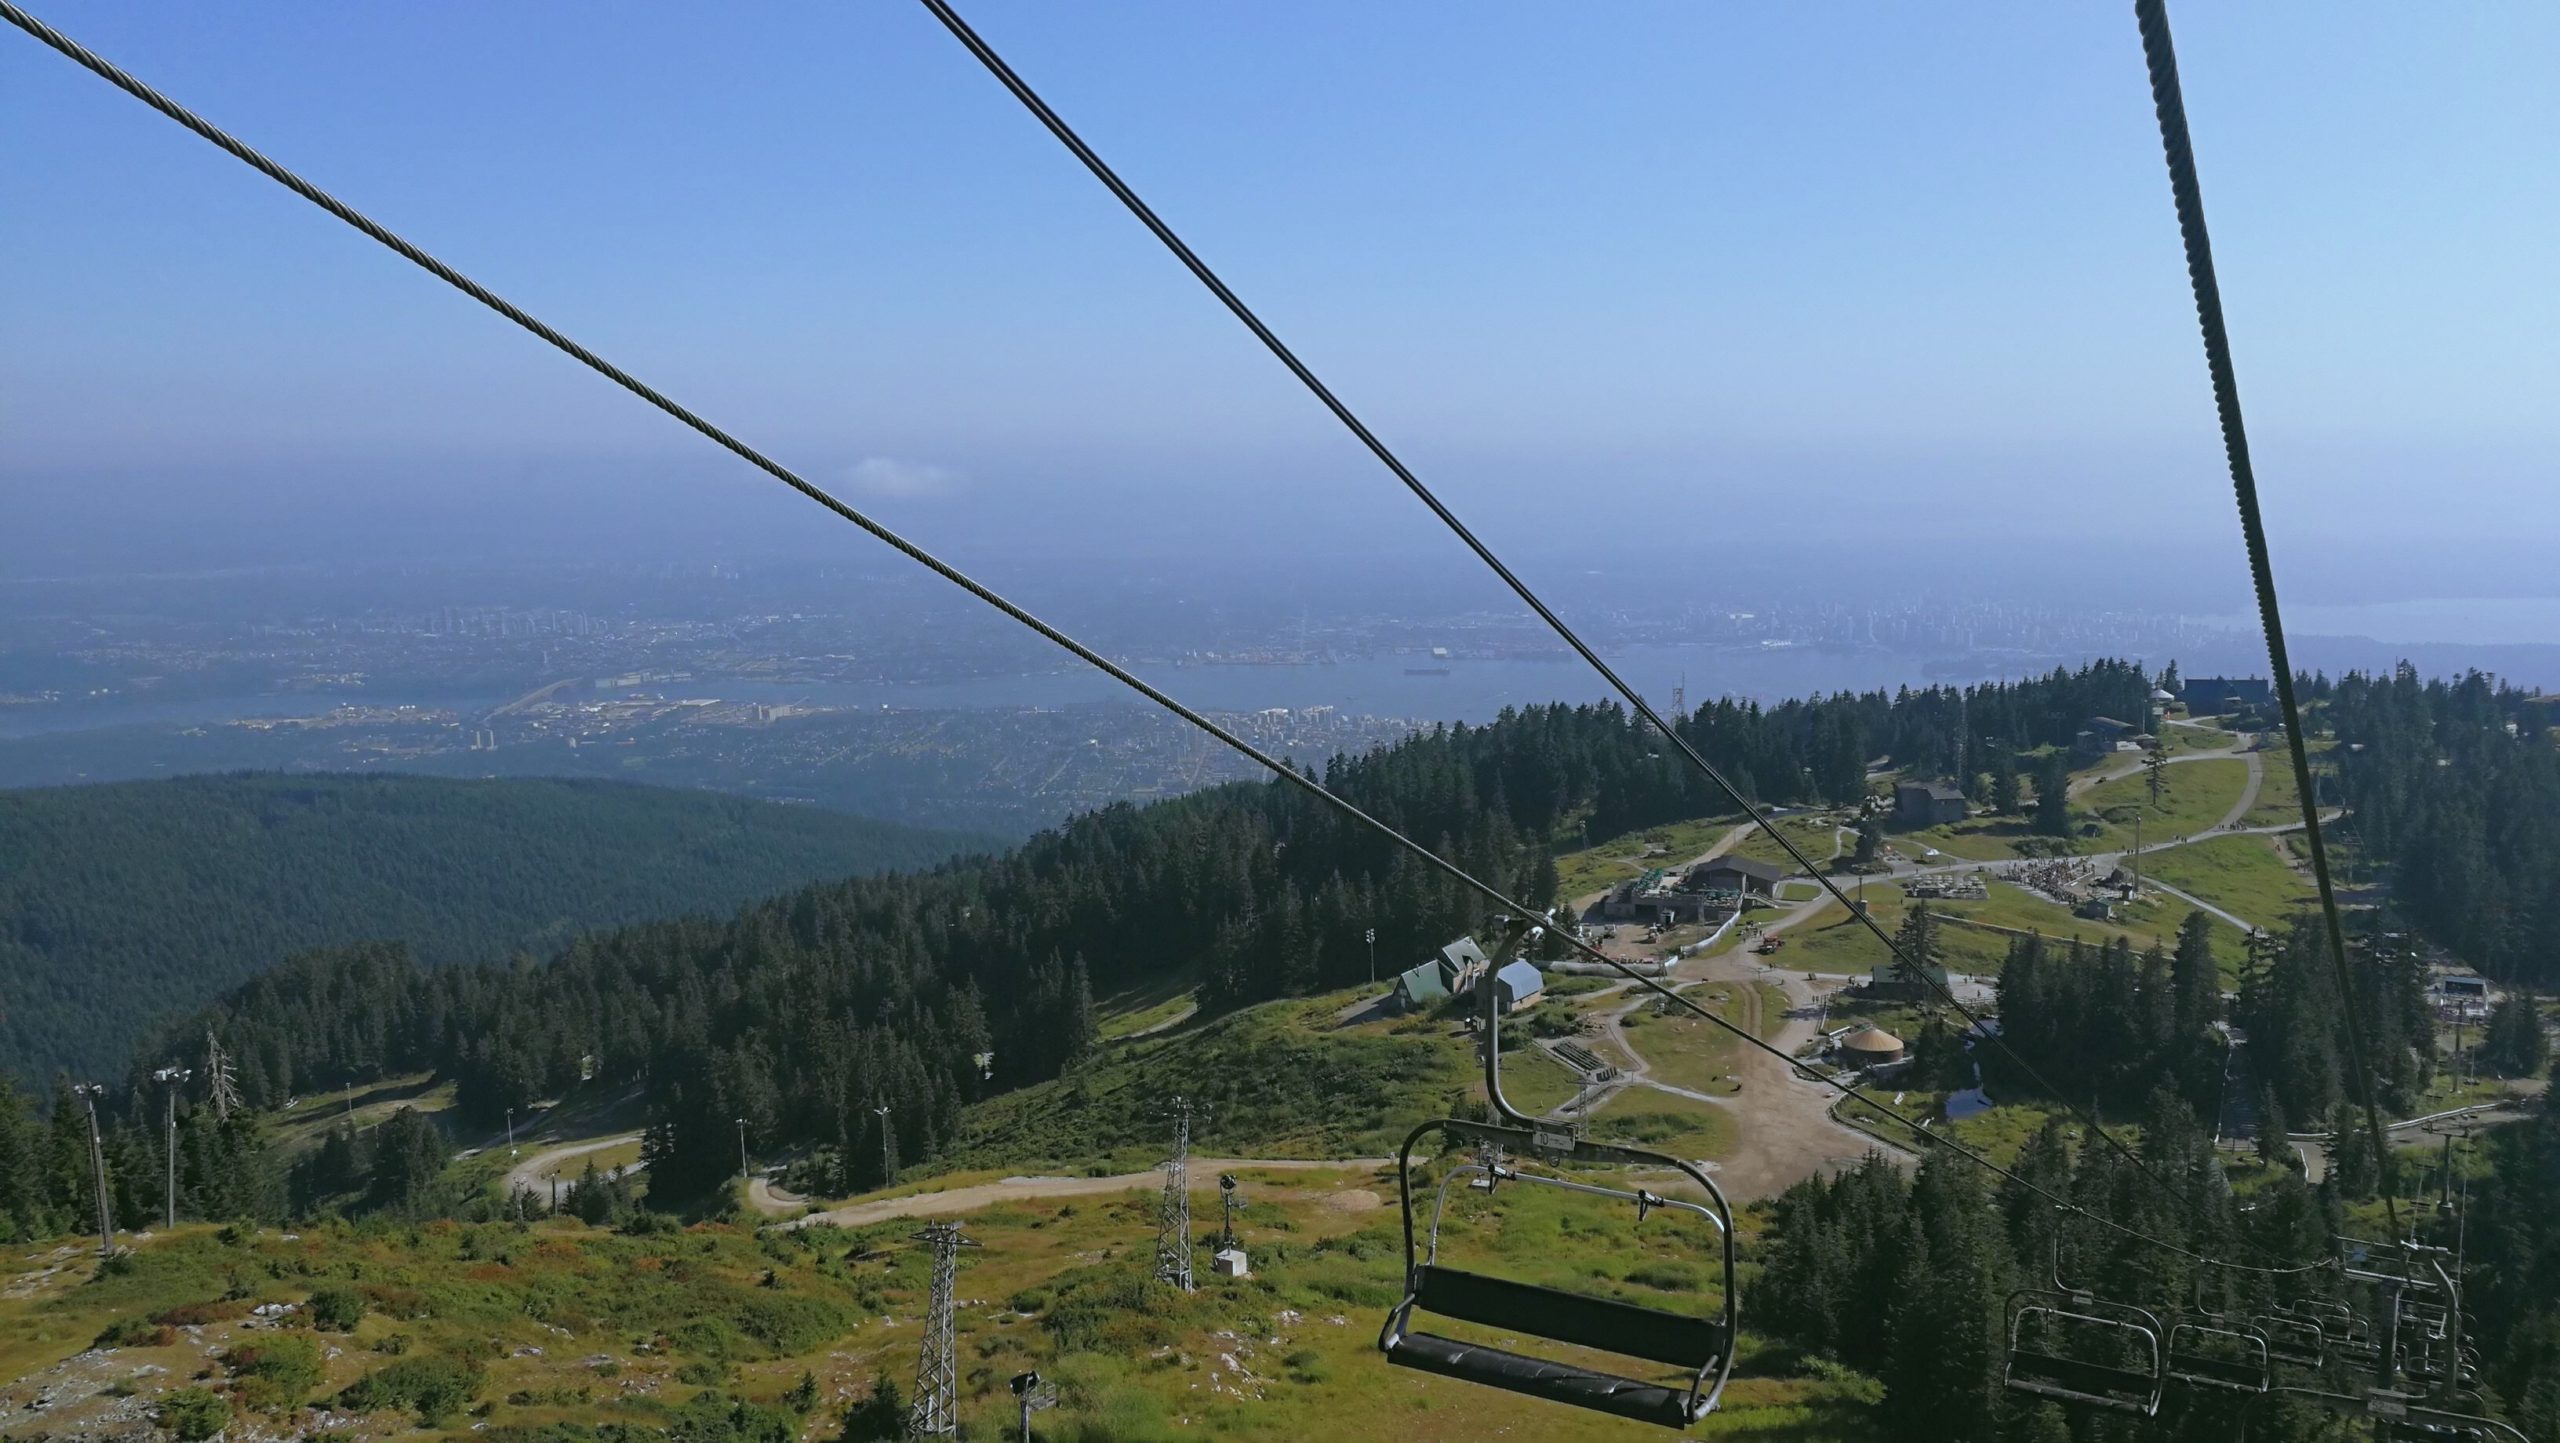 View from the lift to the top of Grouse Mountain